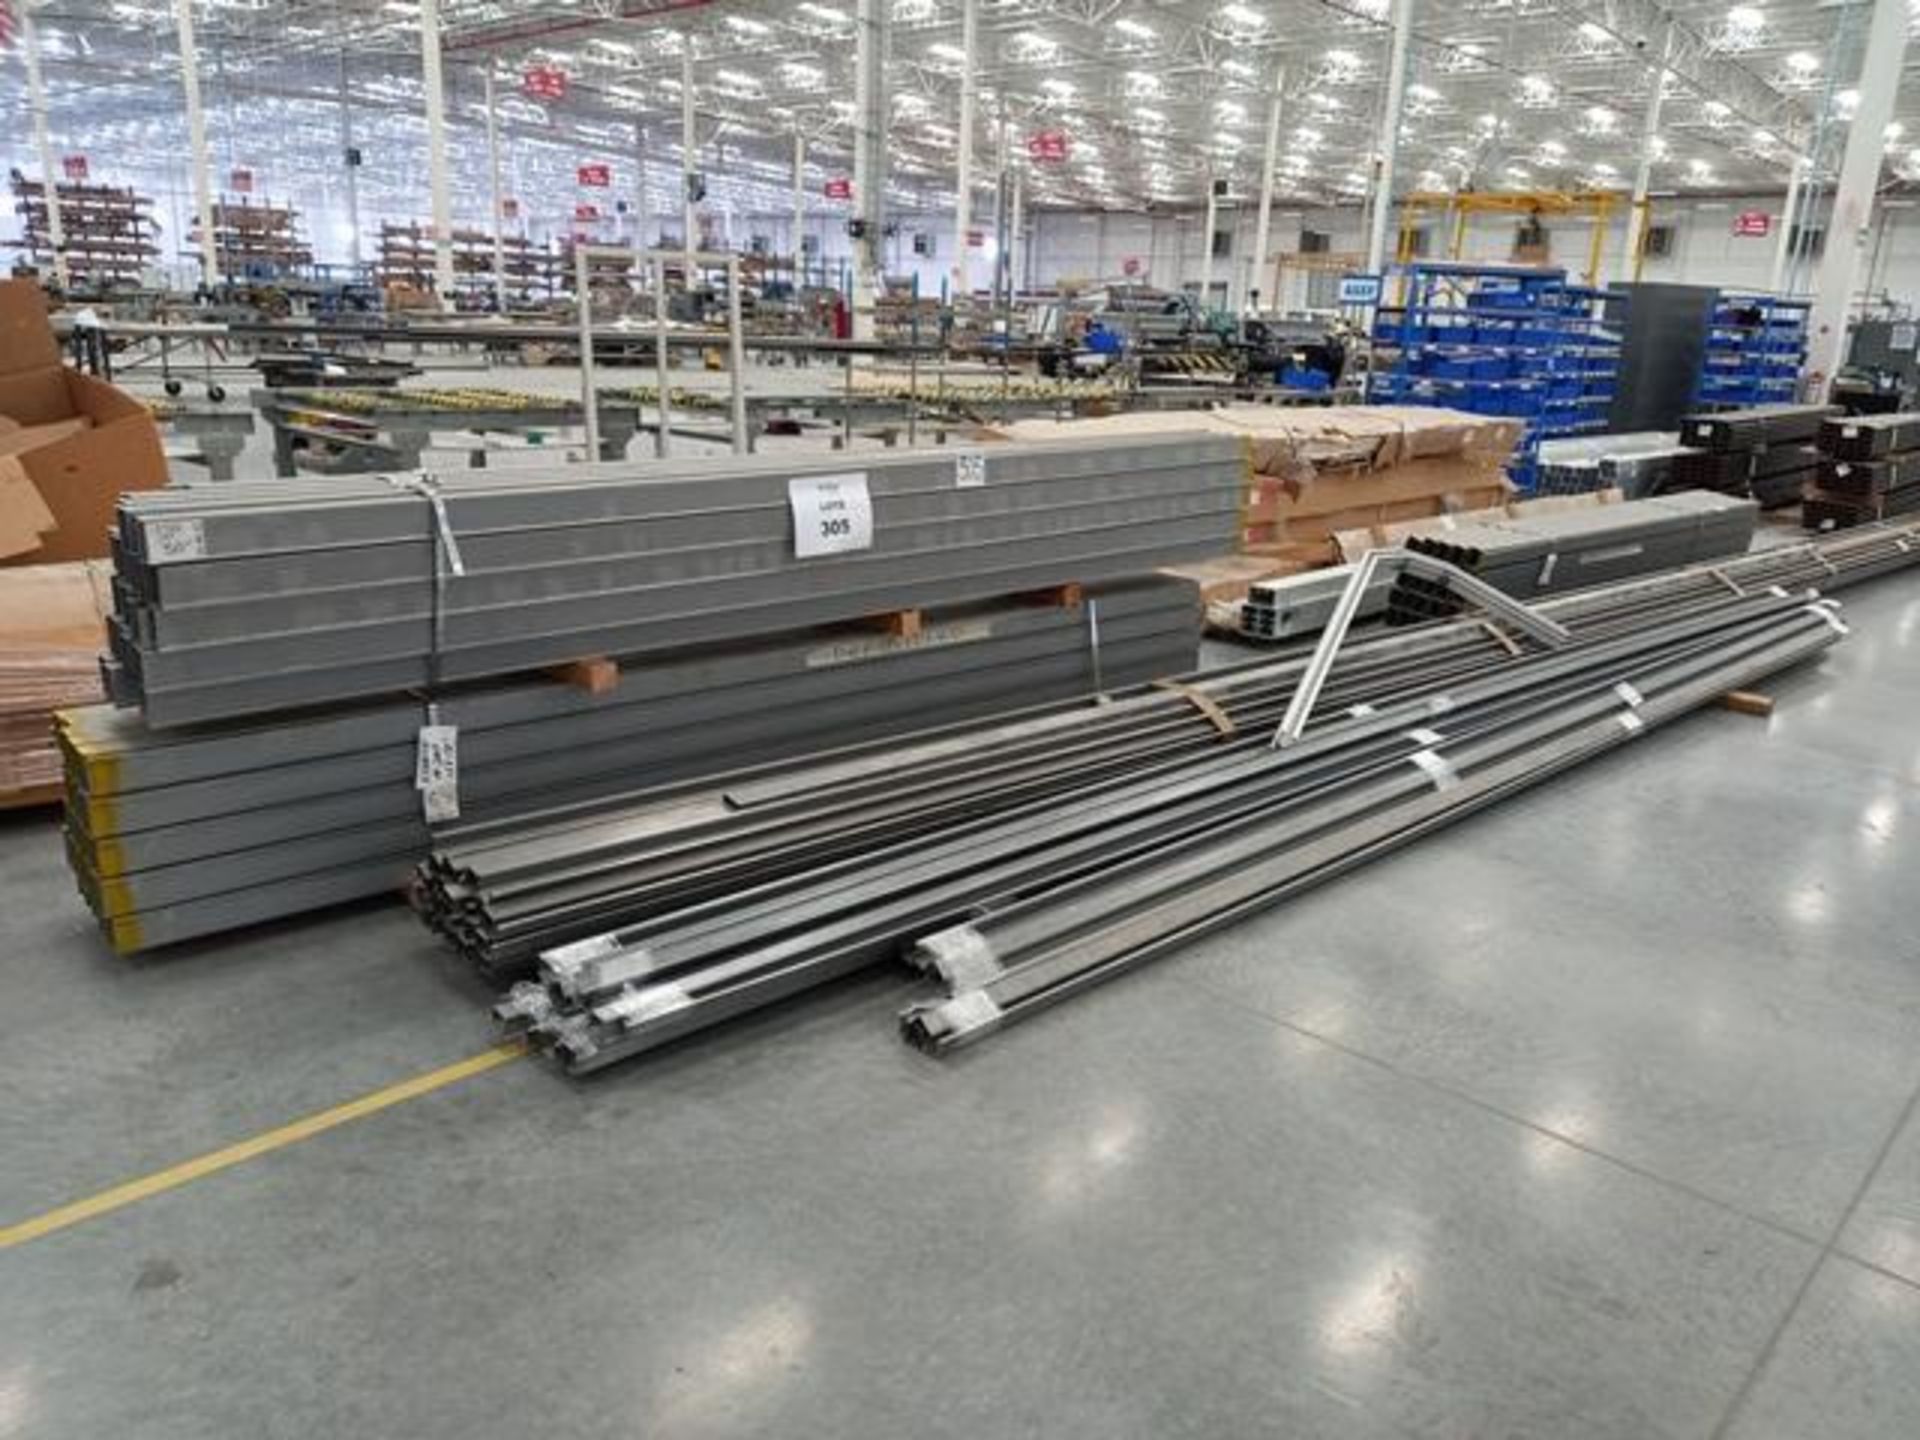 LOT: (30 approx.) Pallets, w/Aluminum Profile, Metal Canelta, Parts for Screens, Foam Boards, - Image 14 of 34